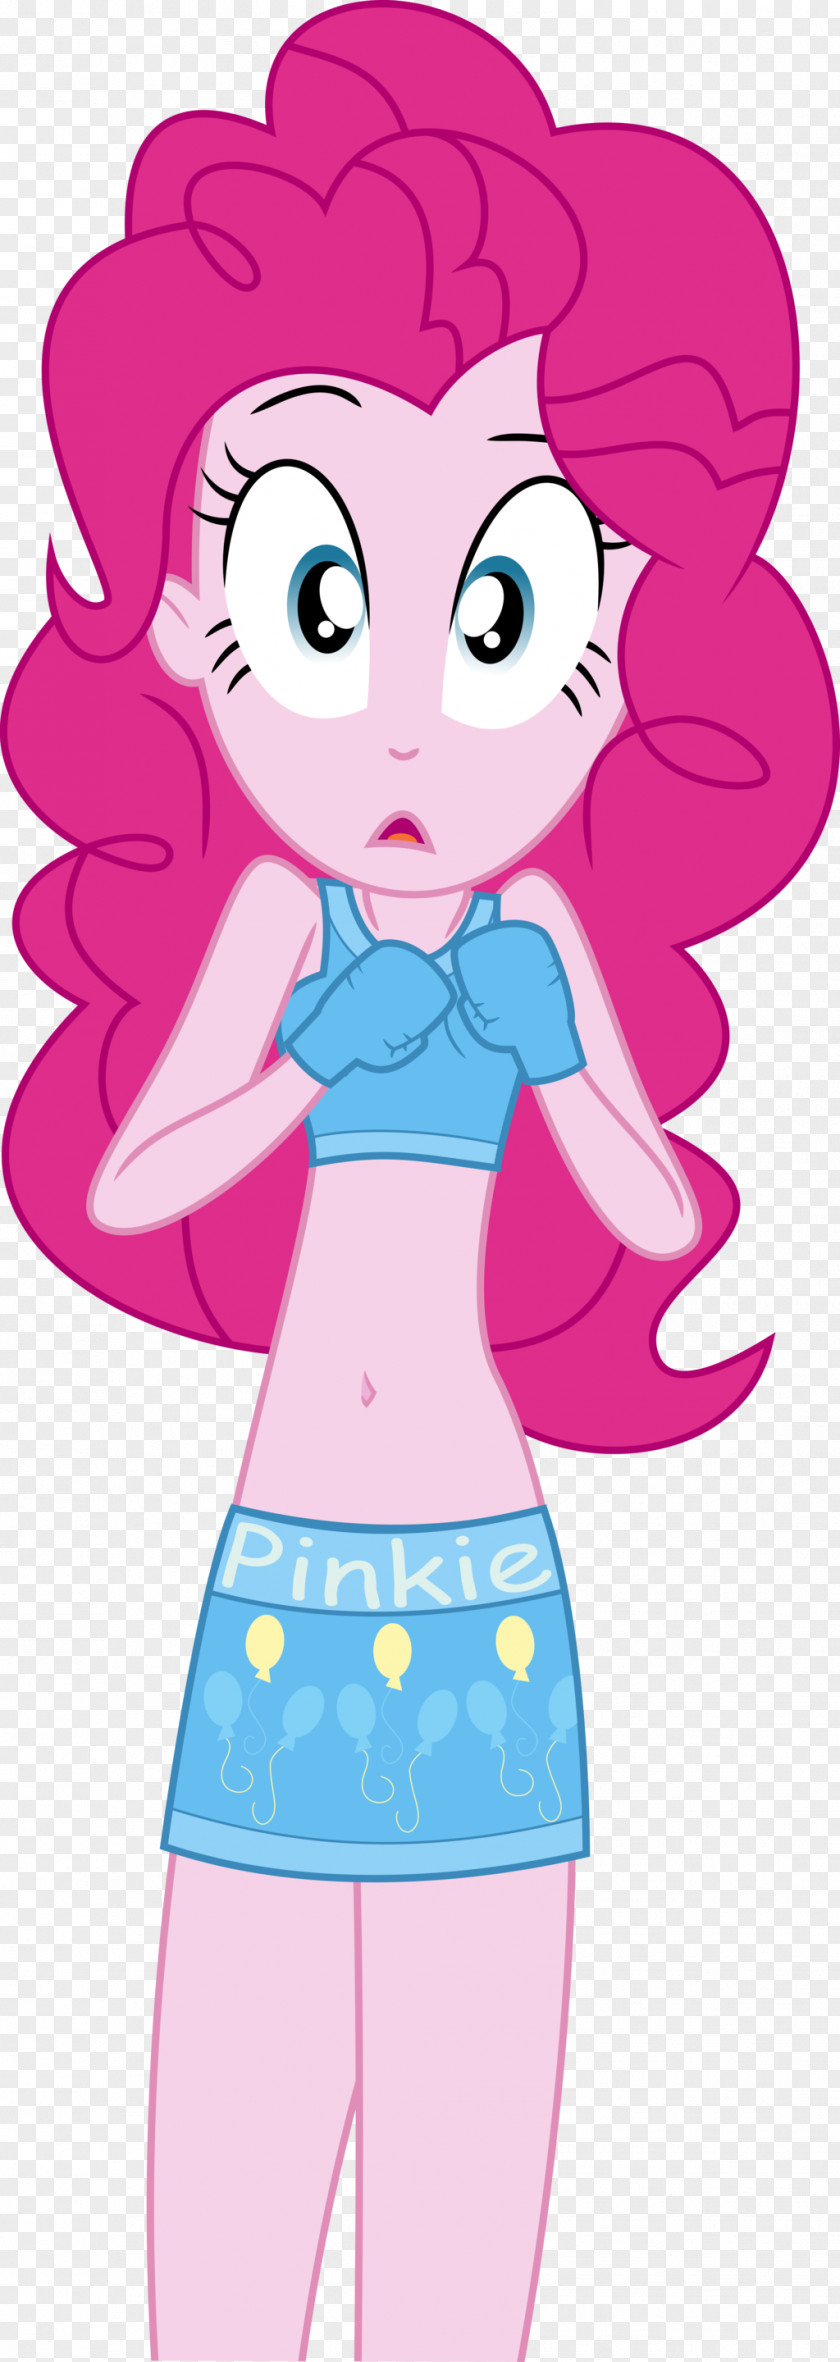 Boxing Pinkie Pie My Little Pony: Friendship Is Magic Clothing PNG